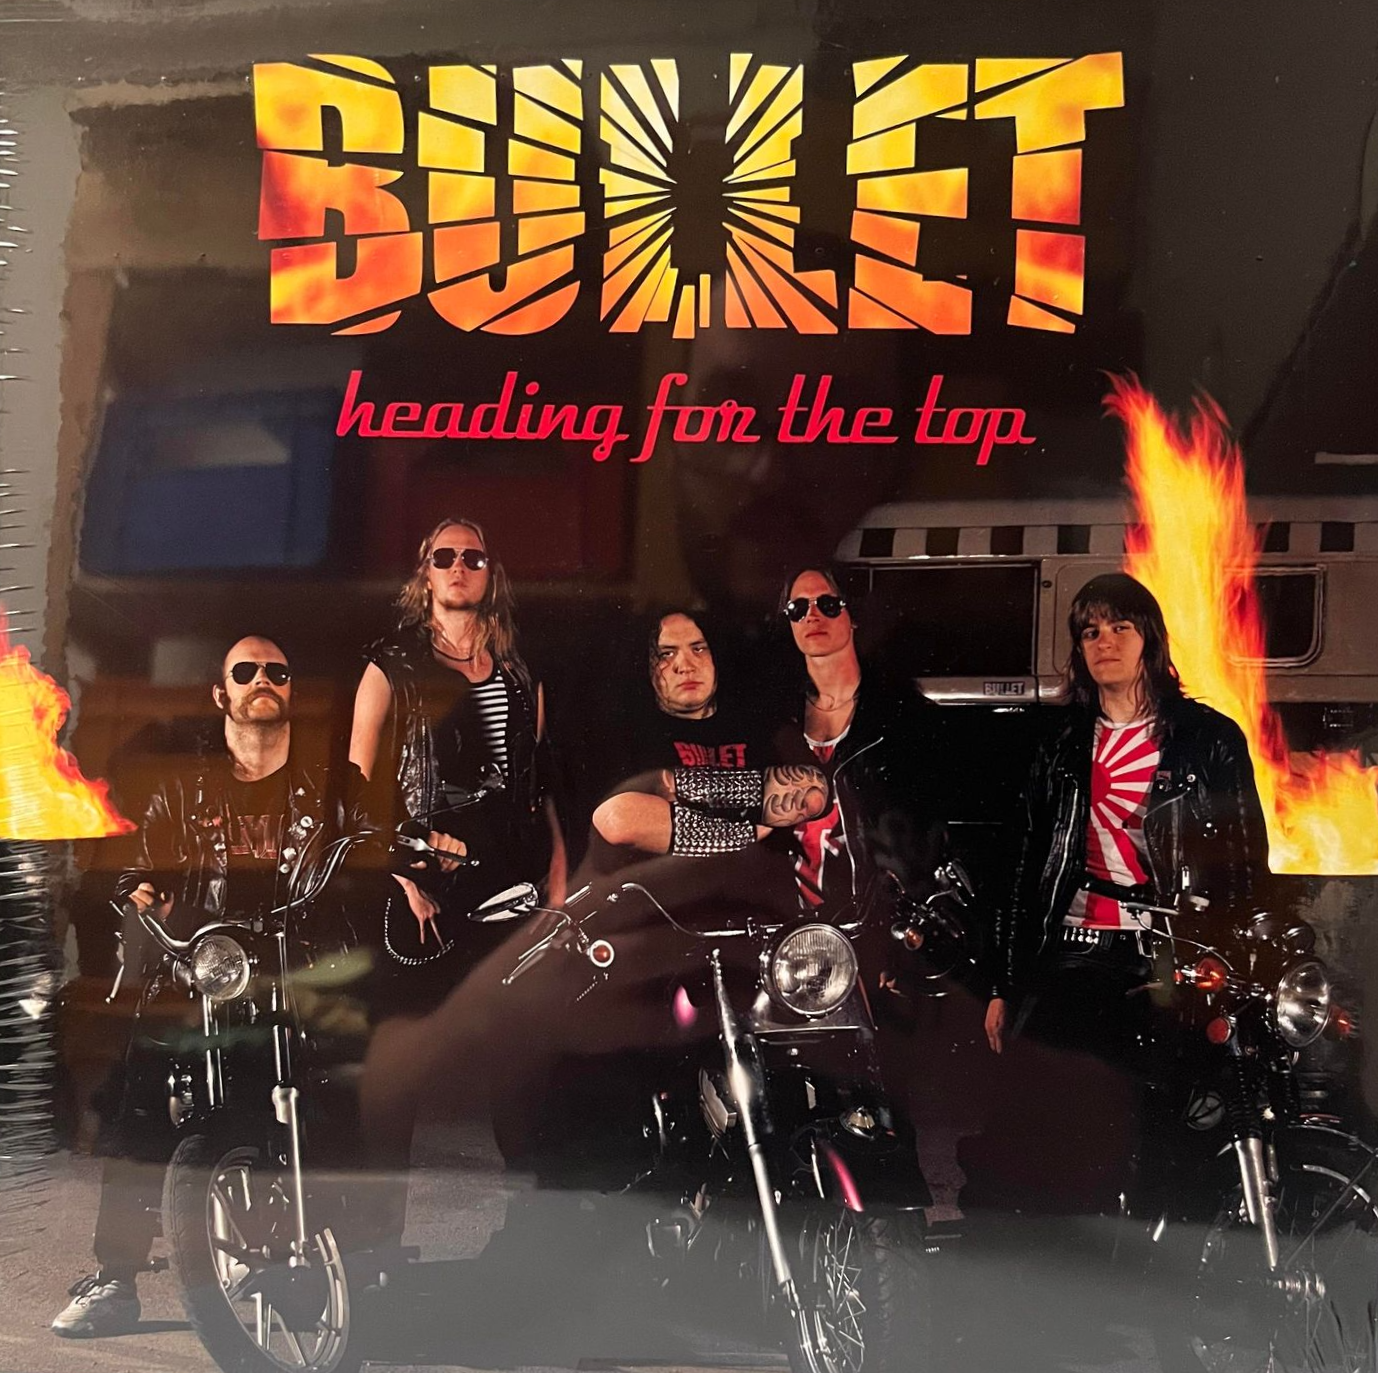 BULLET - HEADING FOR THE TOP